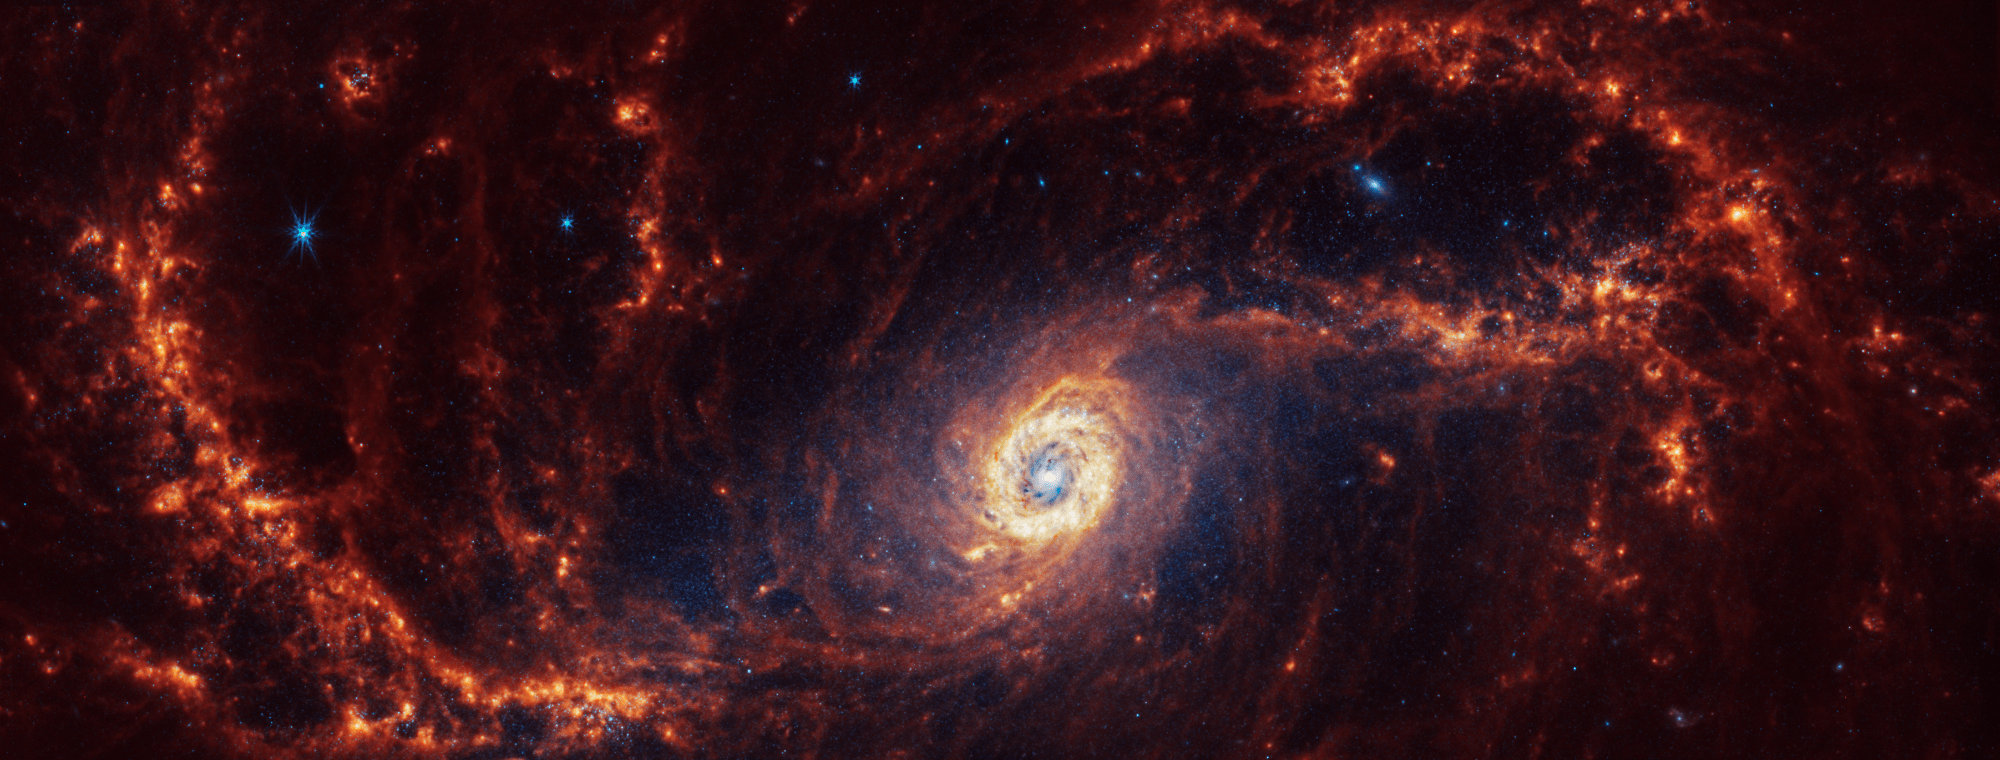 Webb’s image of the galaxy NGC 1672 shows a portion of a face-on barred spiral galaxy anchored by its central region, which is circular and has a bright white point at the center with blue and then yellow circular regions around it, anchored to the right of center. A roughly horizontal bar structure made of a blue haze of stars and filamentary orange dust lanes tilts up slightly and takes up the majority of the image. Two spiny orange spiral arms made of stars, gas, and dust connect to the end of the bar and extend outward, rotating clockwise. The spiral arms are largely orange, ranging from dark to bright orange and extend beyond the edges of the image. They are brightest orange away from the bright central region at left and right, like knots of orange beads strung together. The spiral shape of the galaxy is less apparent in this view, with the arms looking more like irregular waves in an ocean’s tides. There are many more dark or black regions between where the orange gas and dust of the bar and spiral arms appear. Scattered across the scene are some bright blue pinpoints of light.